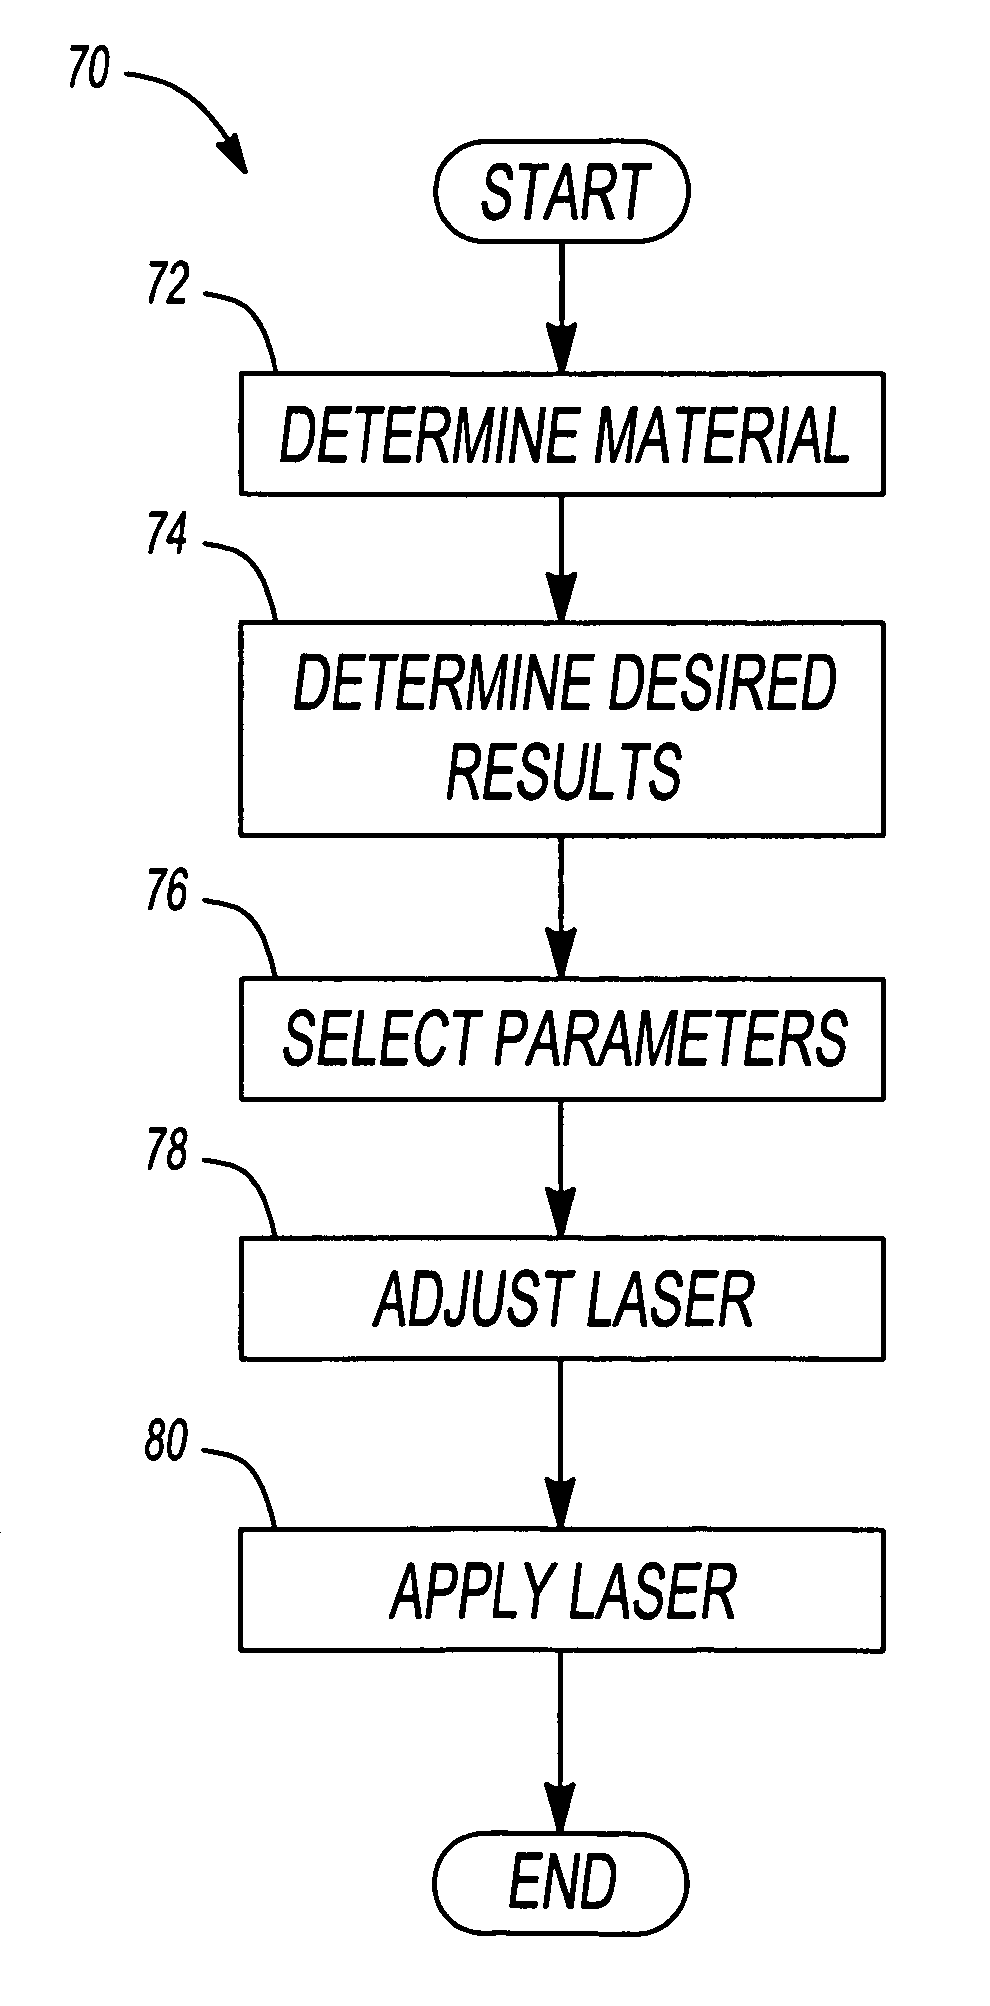 Manufacturing method that uses laser surface transformation to produce new and unique surface profiles for rotating bearings